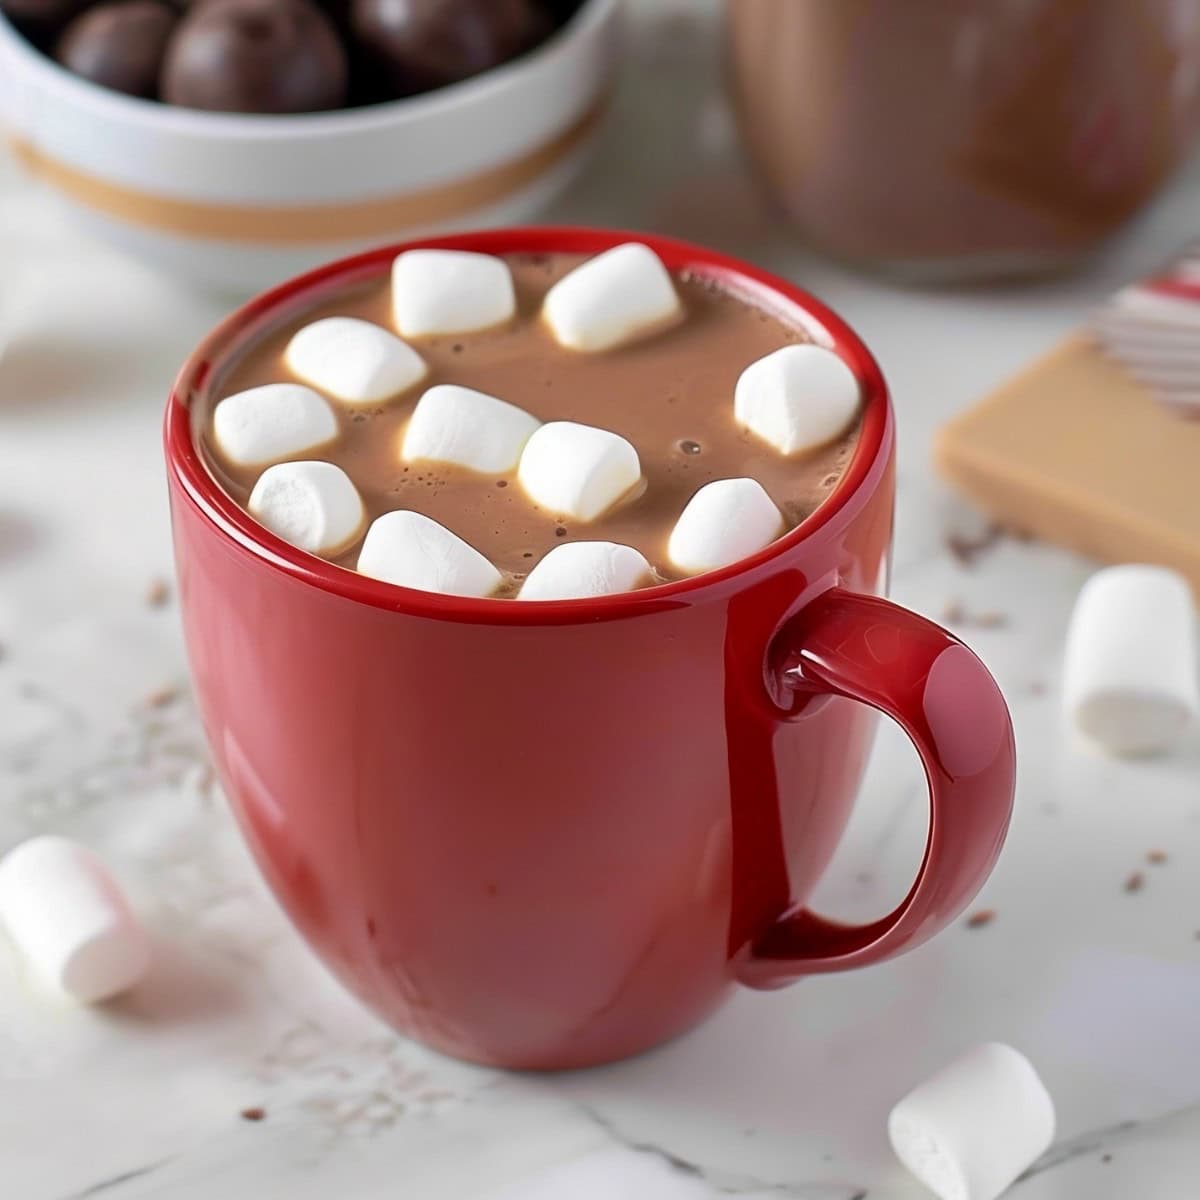 Hot chocolate in a red mug with mini marshmallows